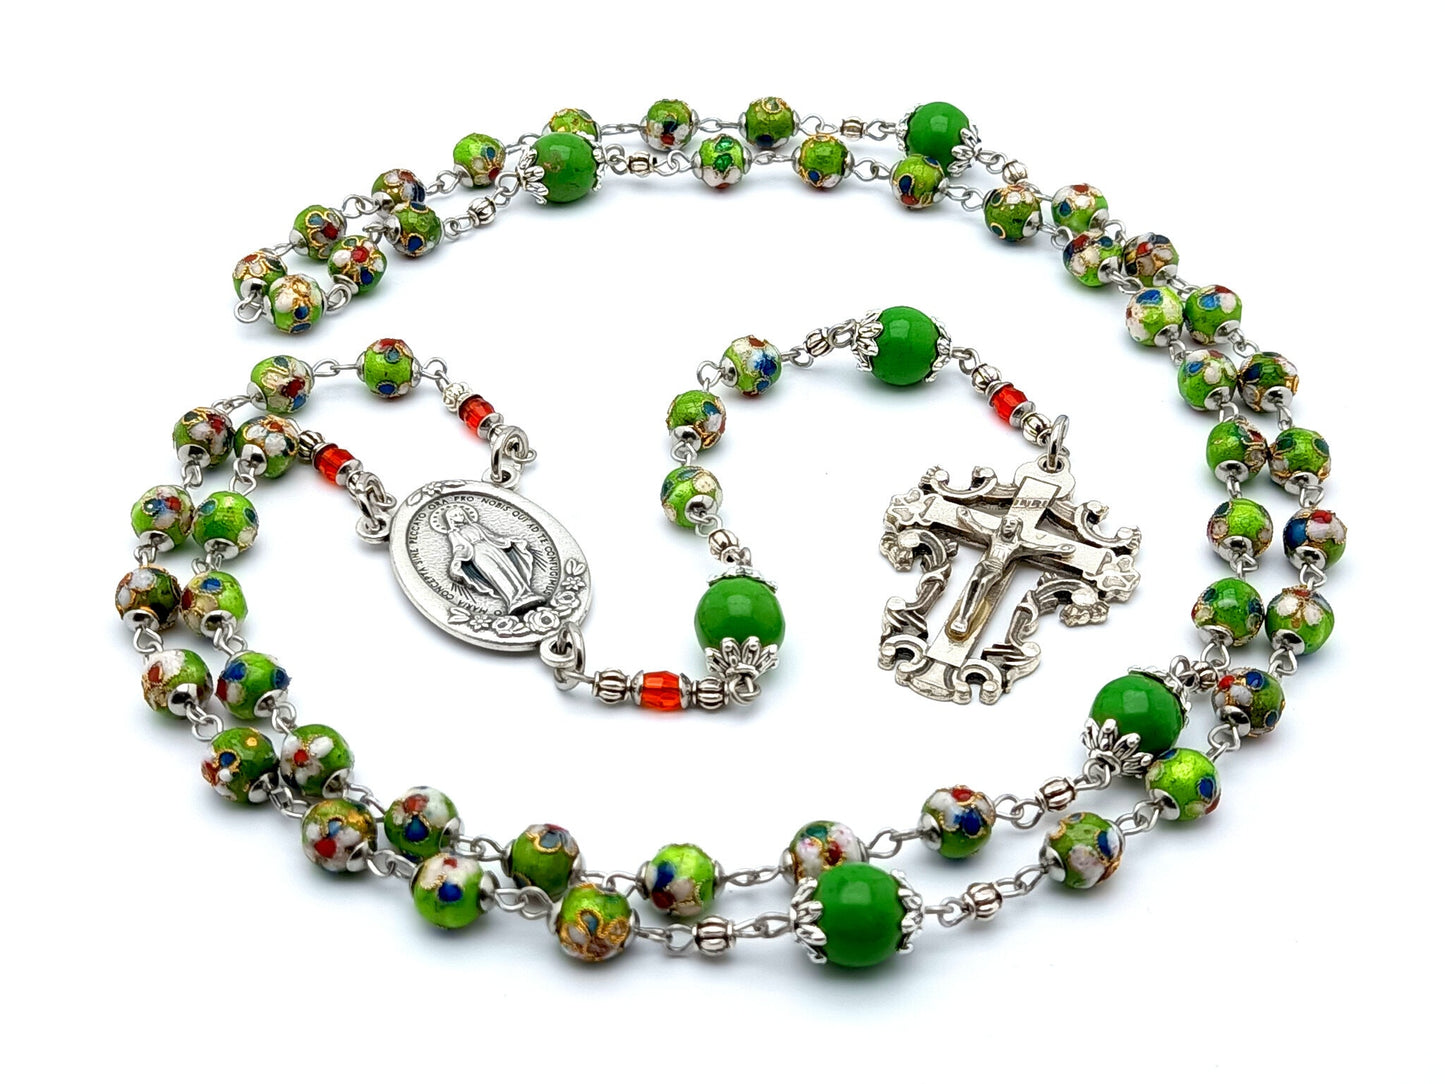 Miraculous medal unique rosary beads with cloisonne green enamel and howlite beads, filigree crucifix and miracluous medal floral centre medal.